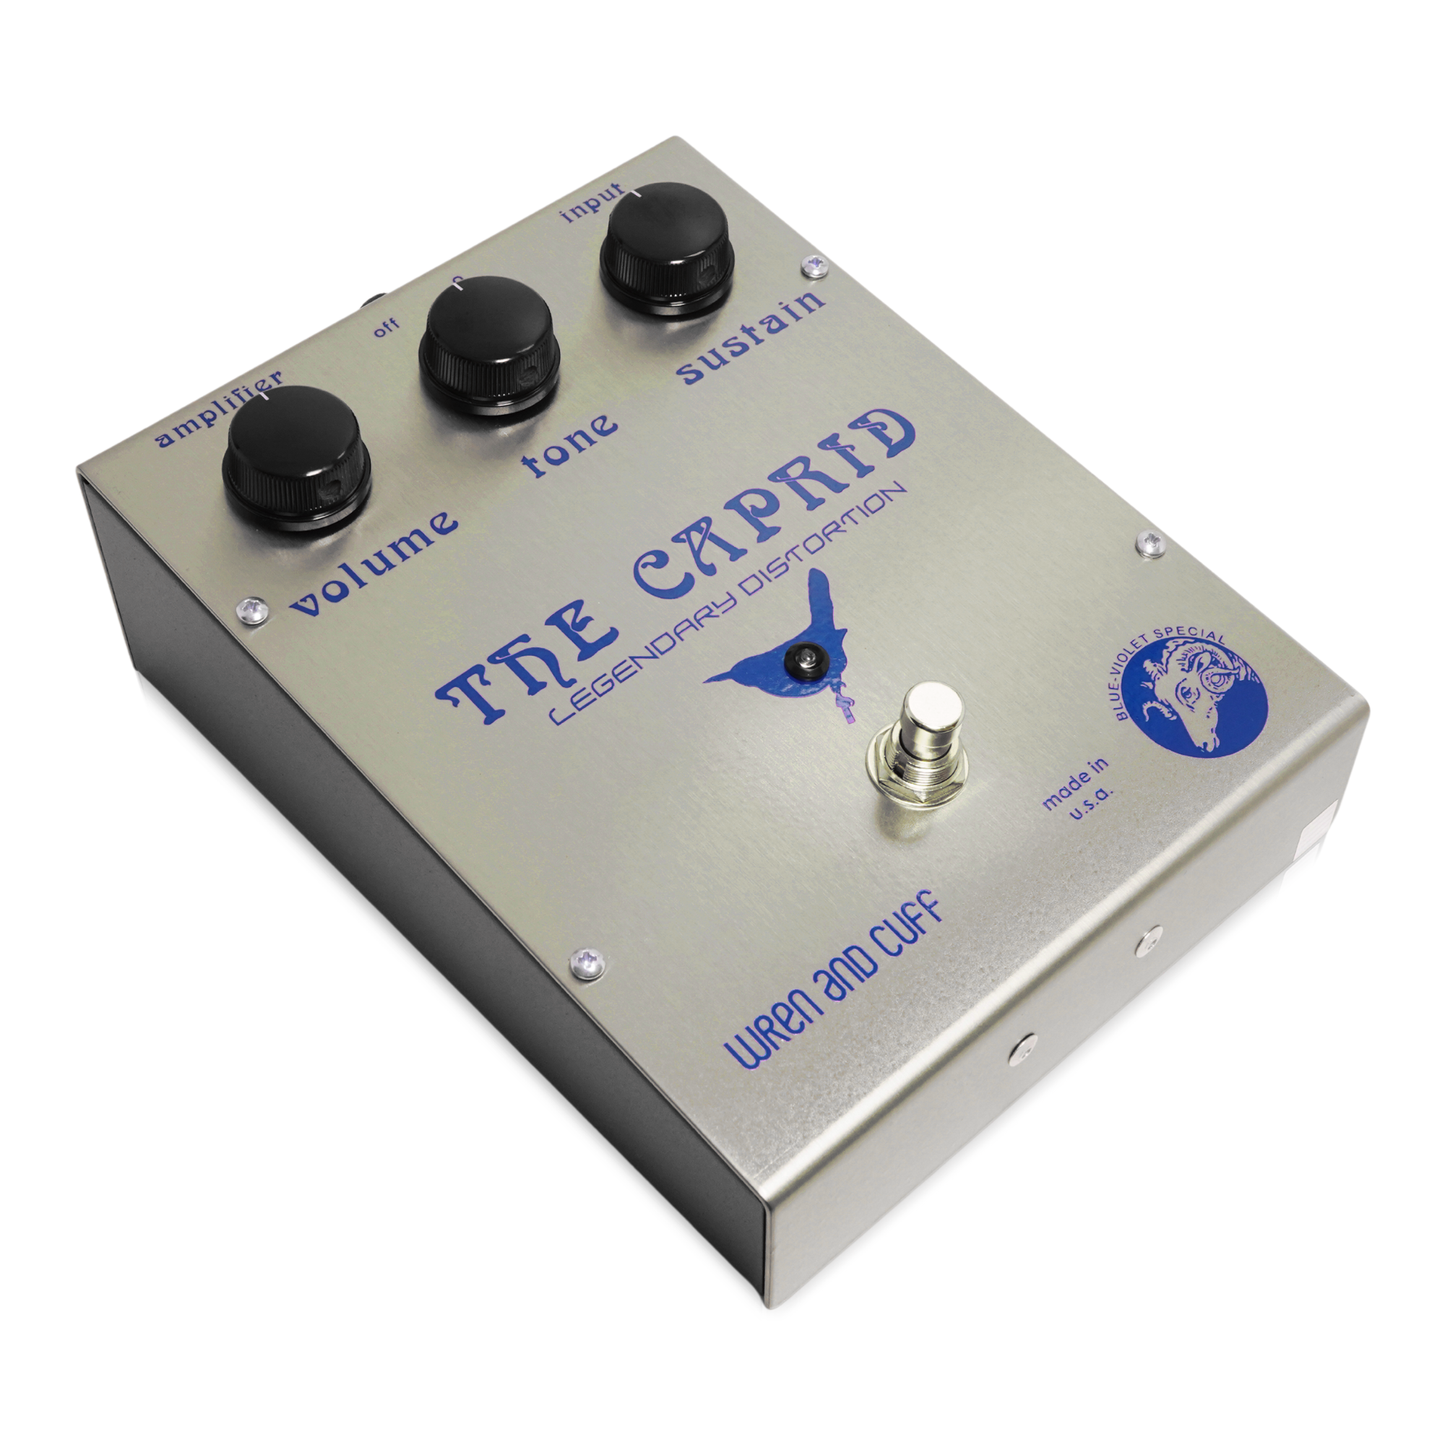 Wren and Cuff　Caprid Blue Violet Special Edition　/ ファズ ギター エフェクター